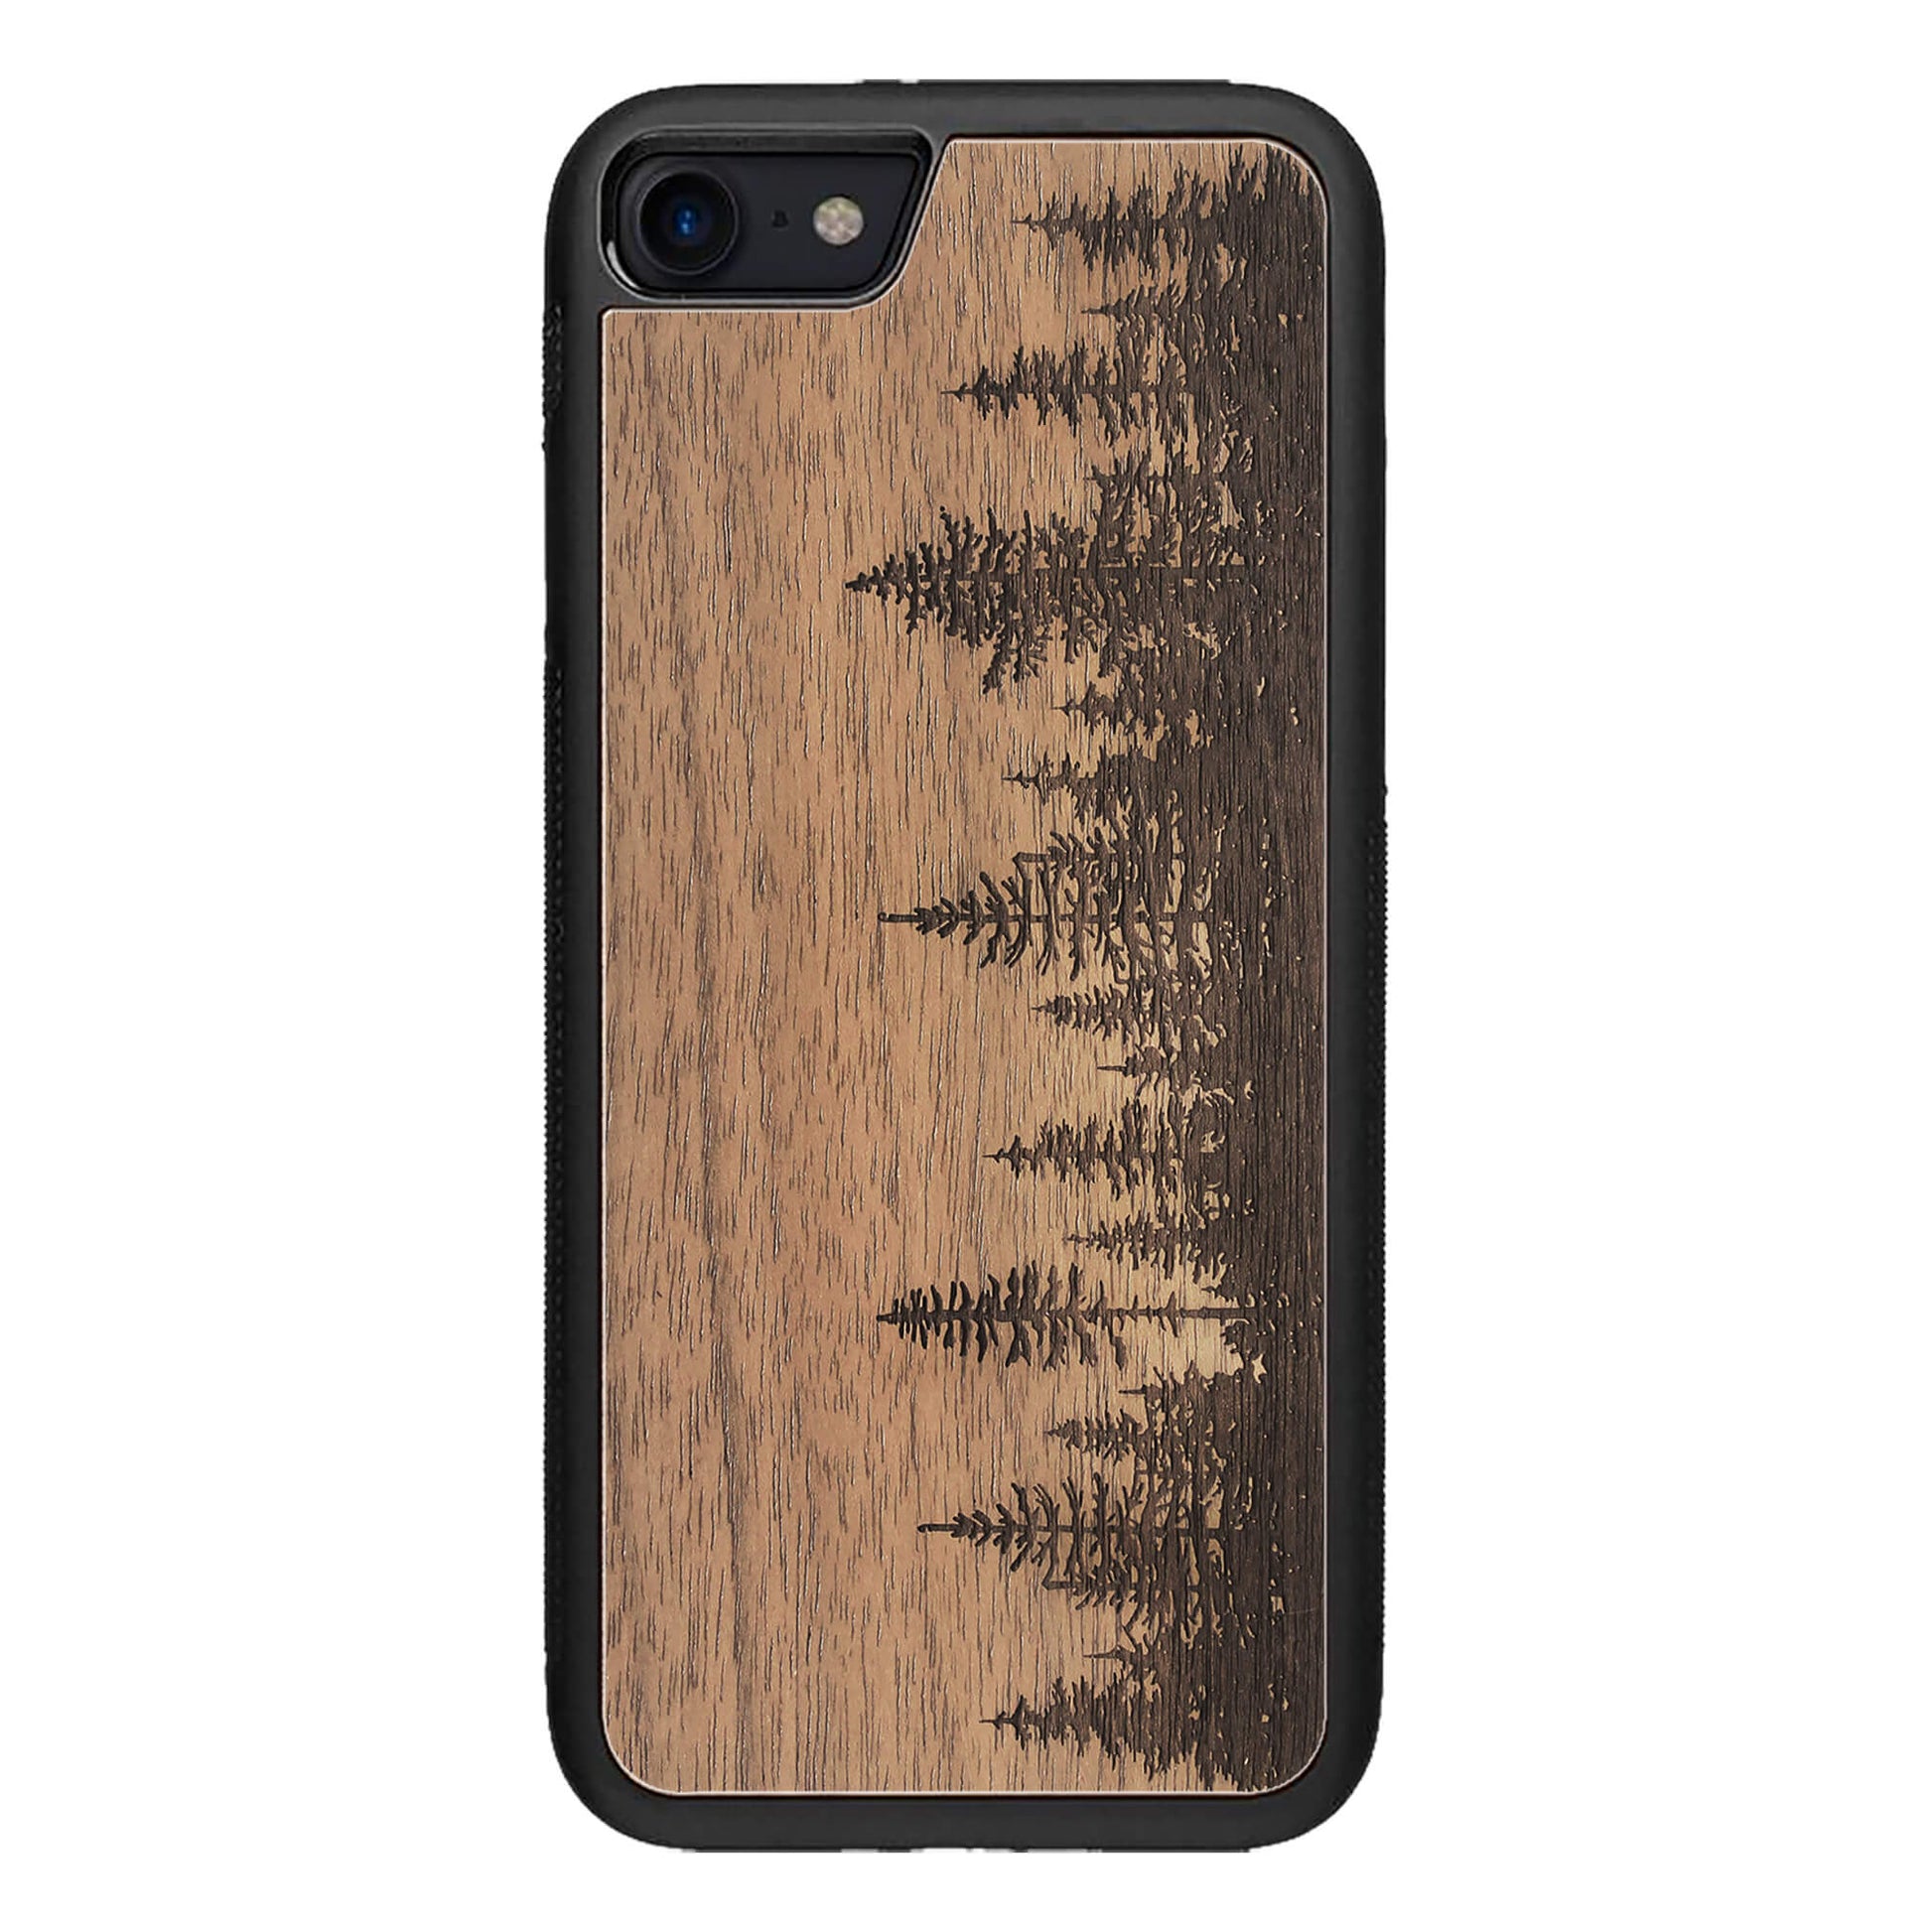 Wooden Case for iPhone SE 2 generation case Forest